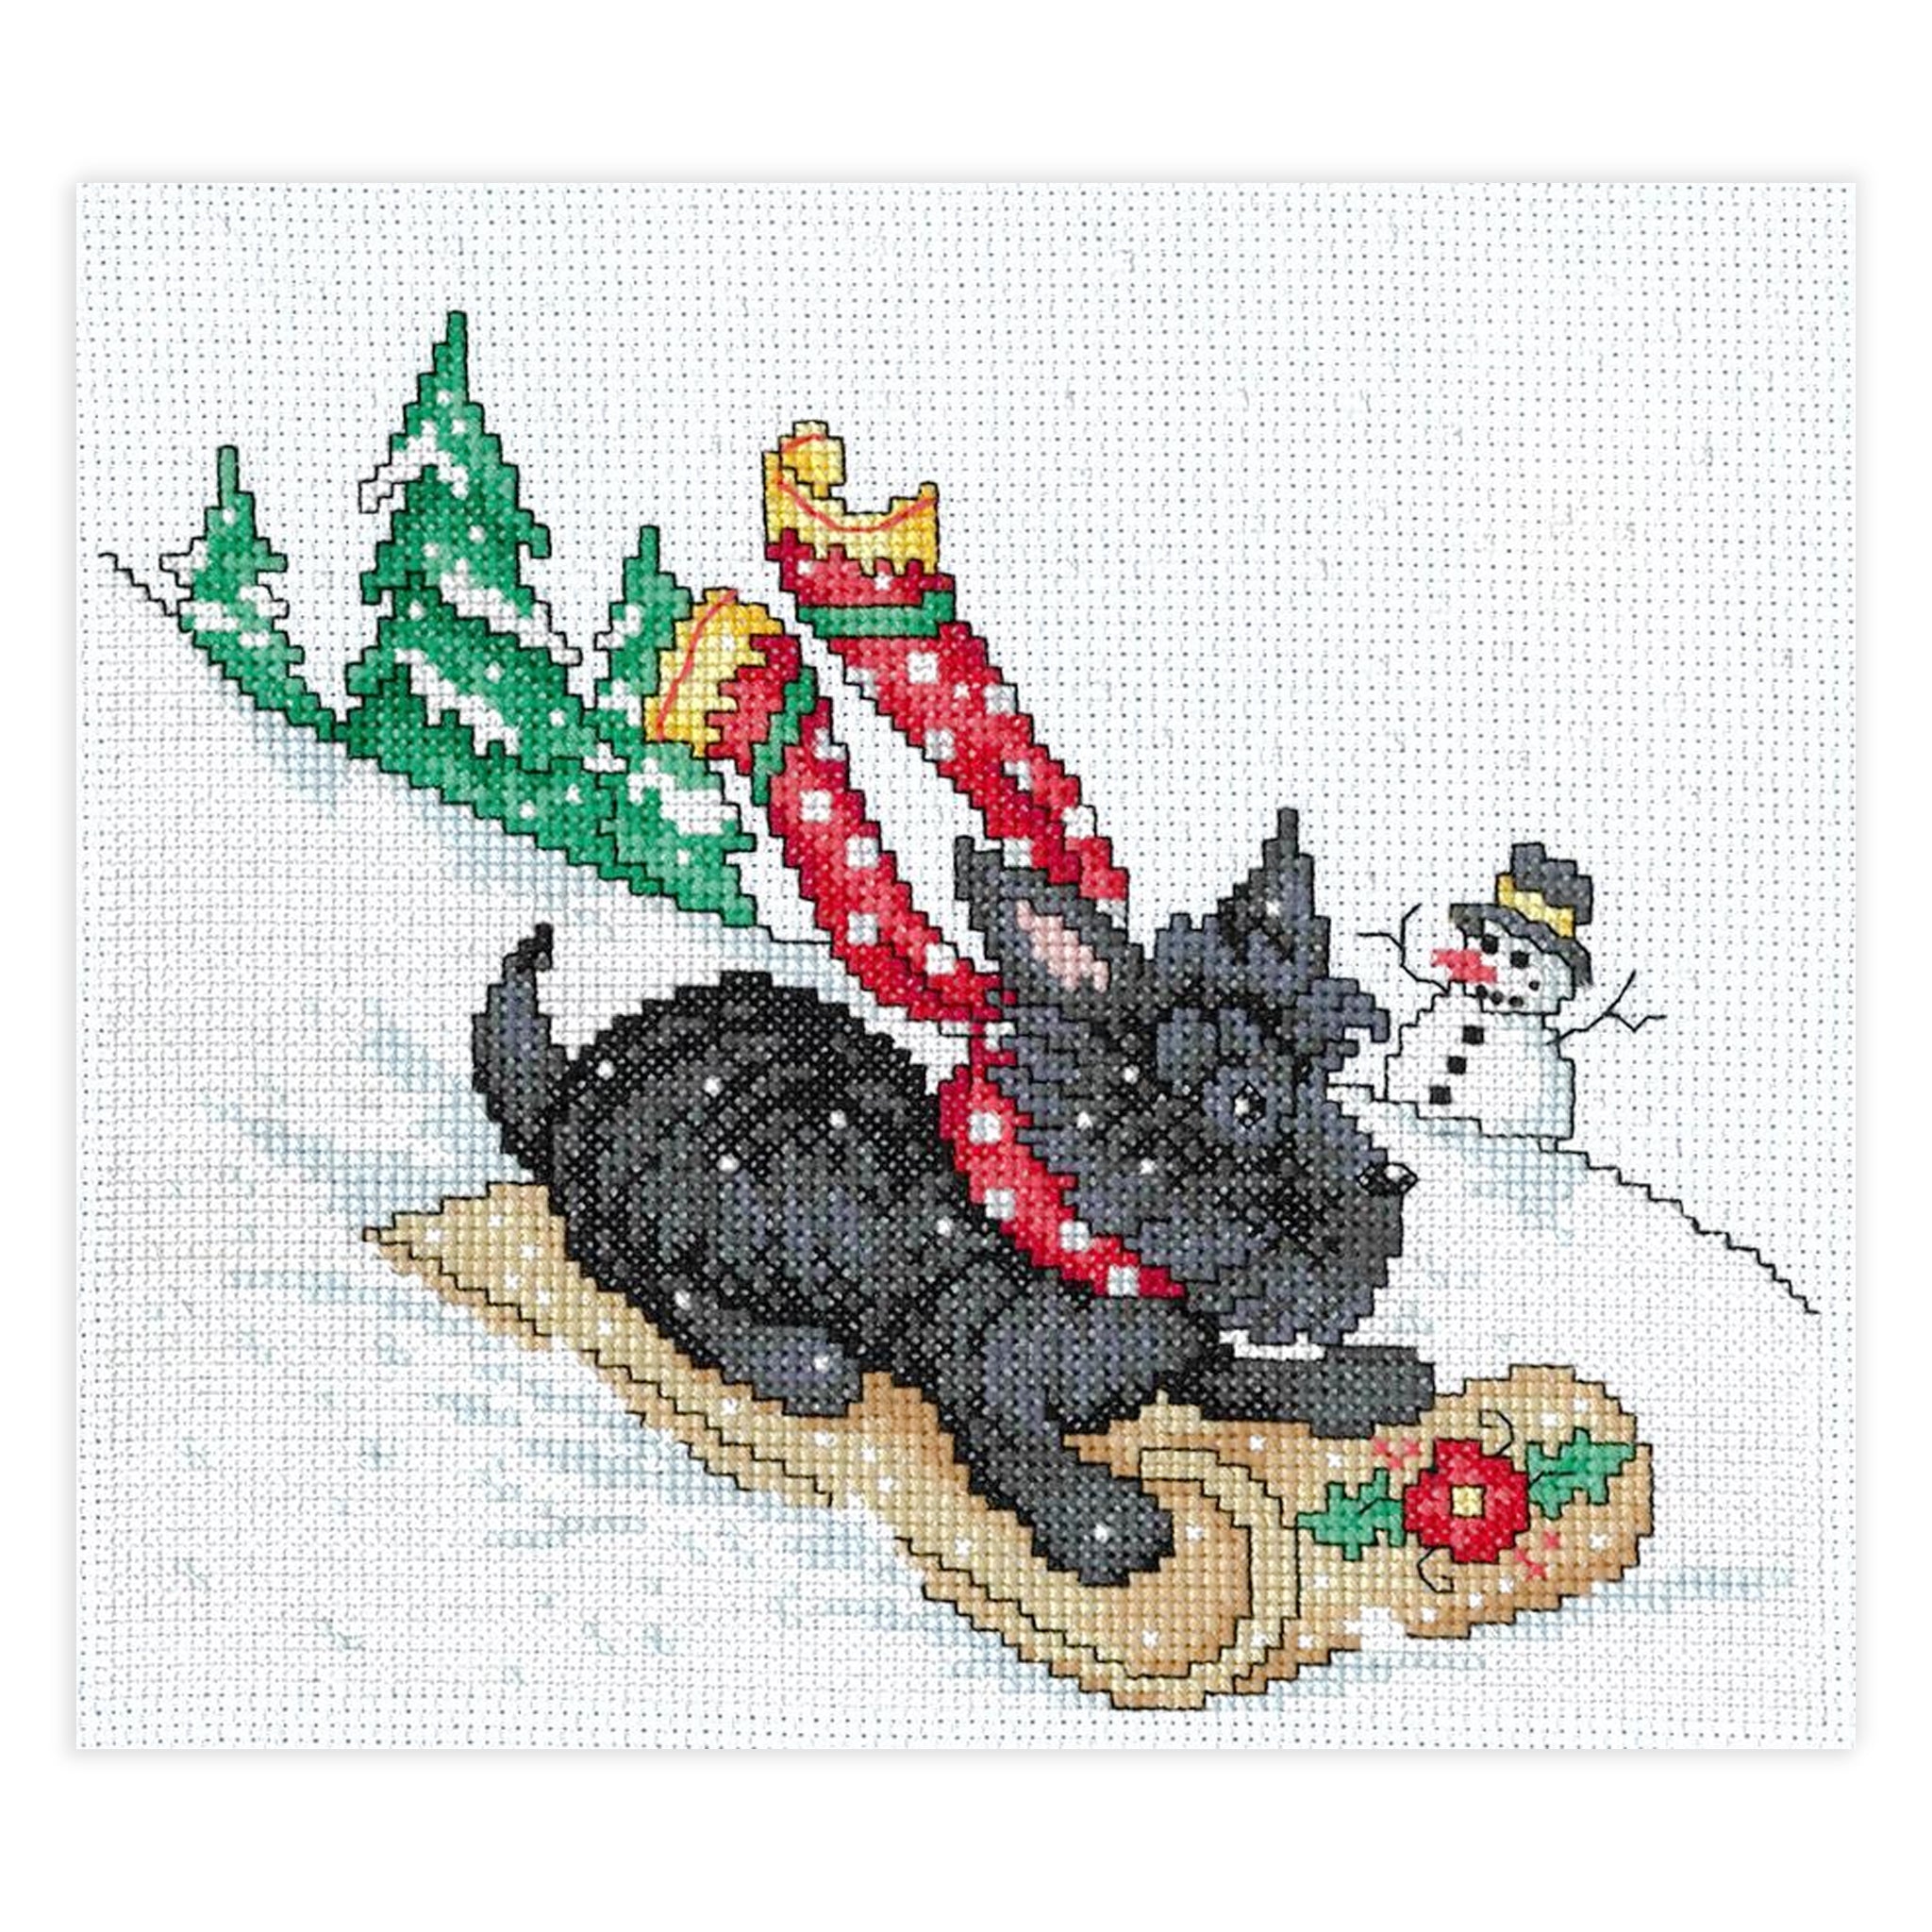 Counted Cross Stitch Kit: Draw String Gift Bags: Christmas Motifs